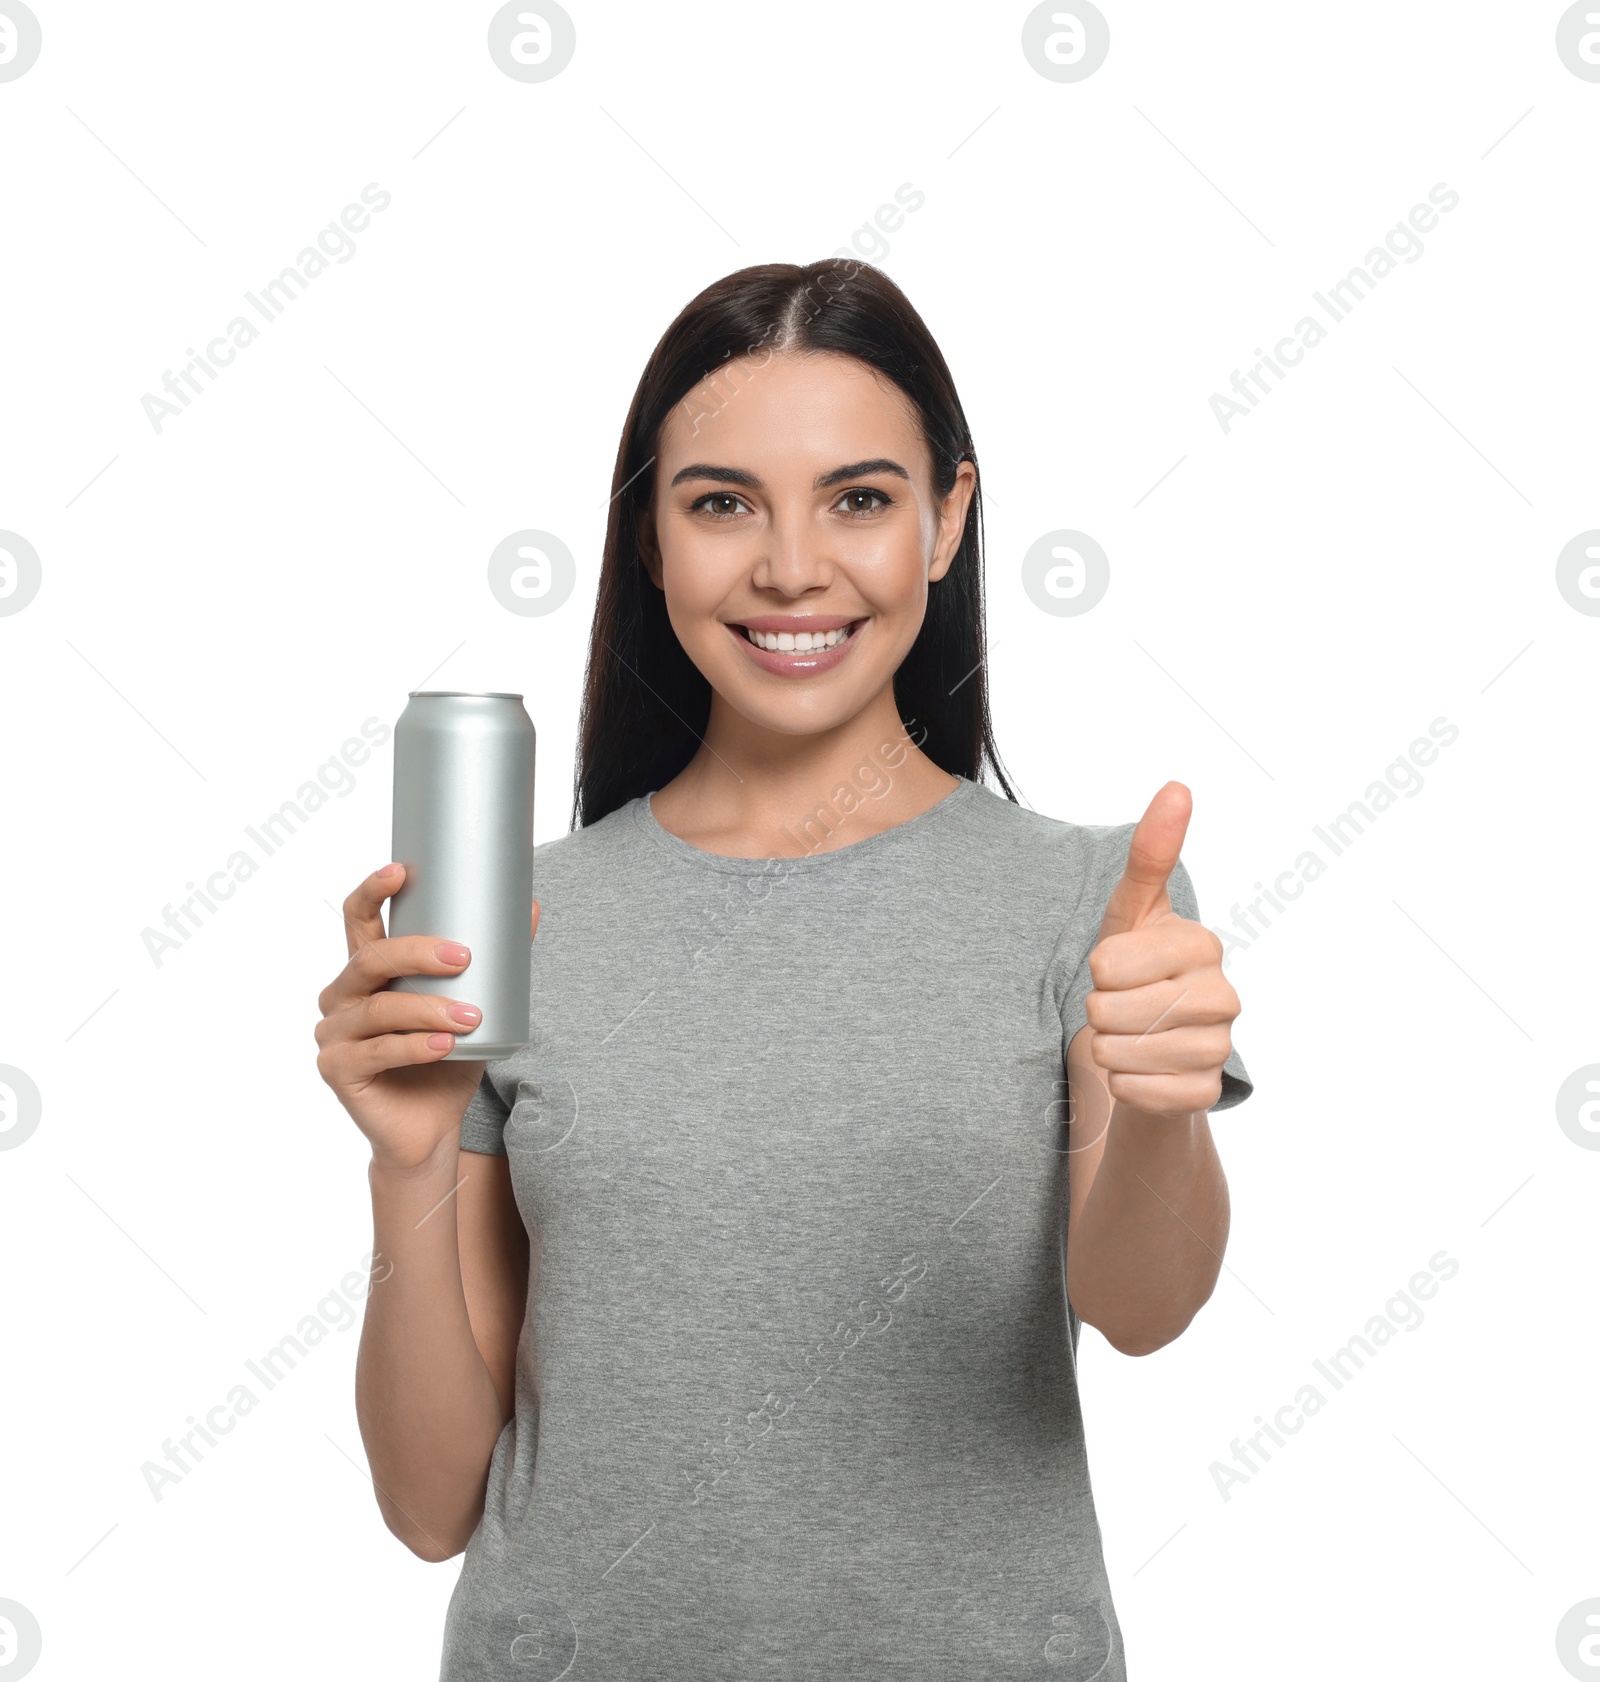 Photo of Beautiful happy woman holding beverage can and showing thumbs up on white background